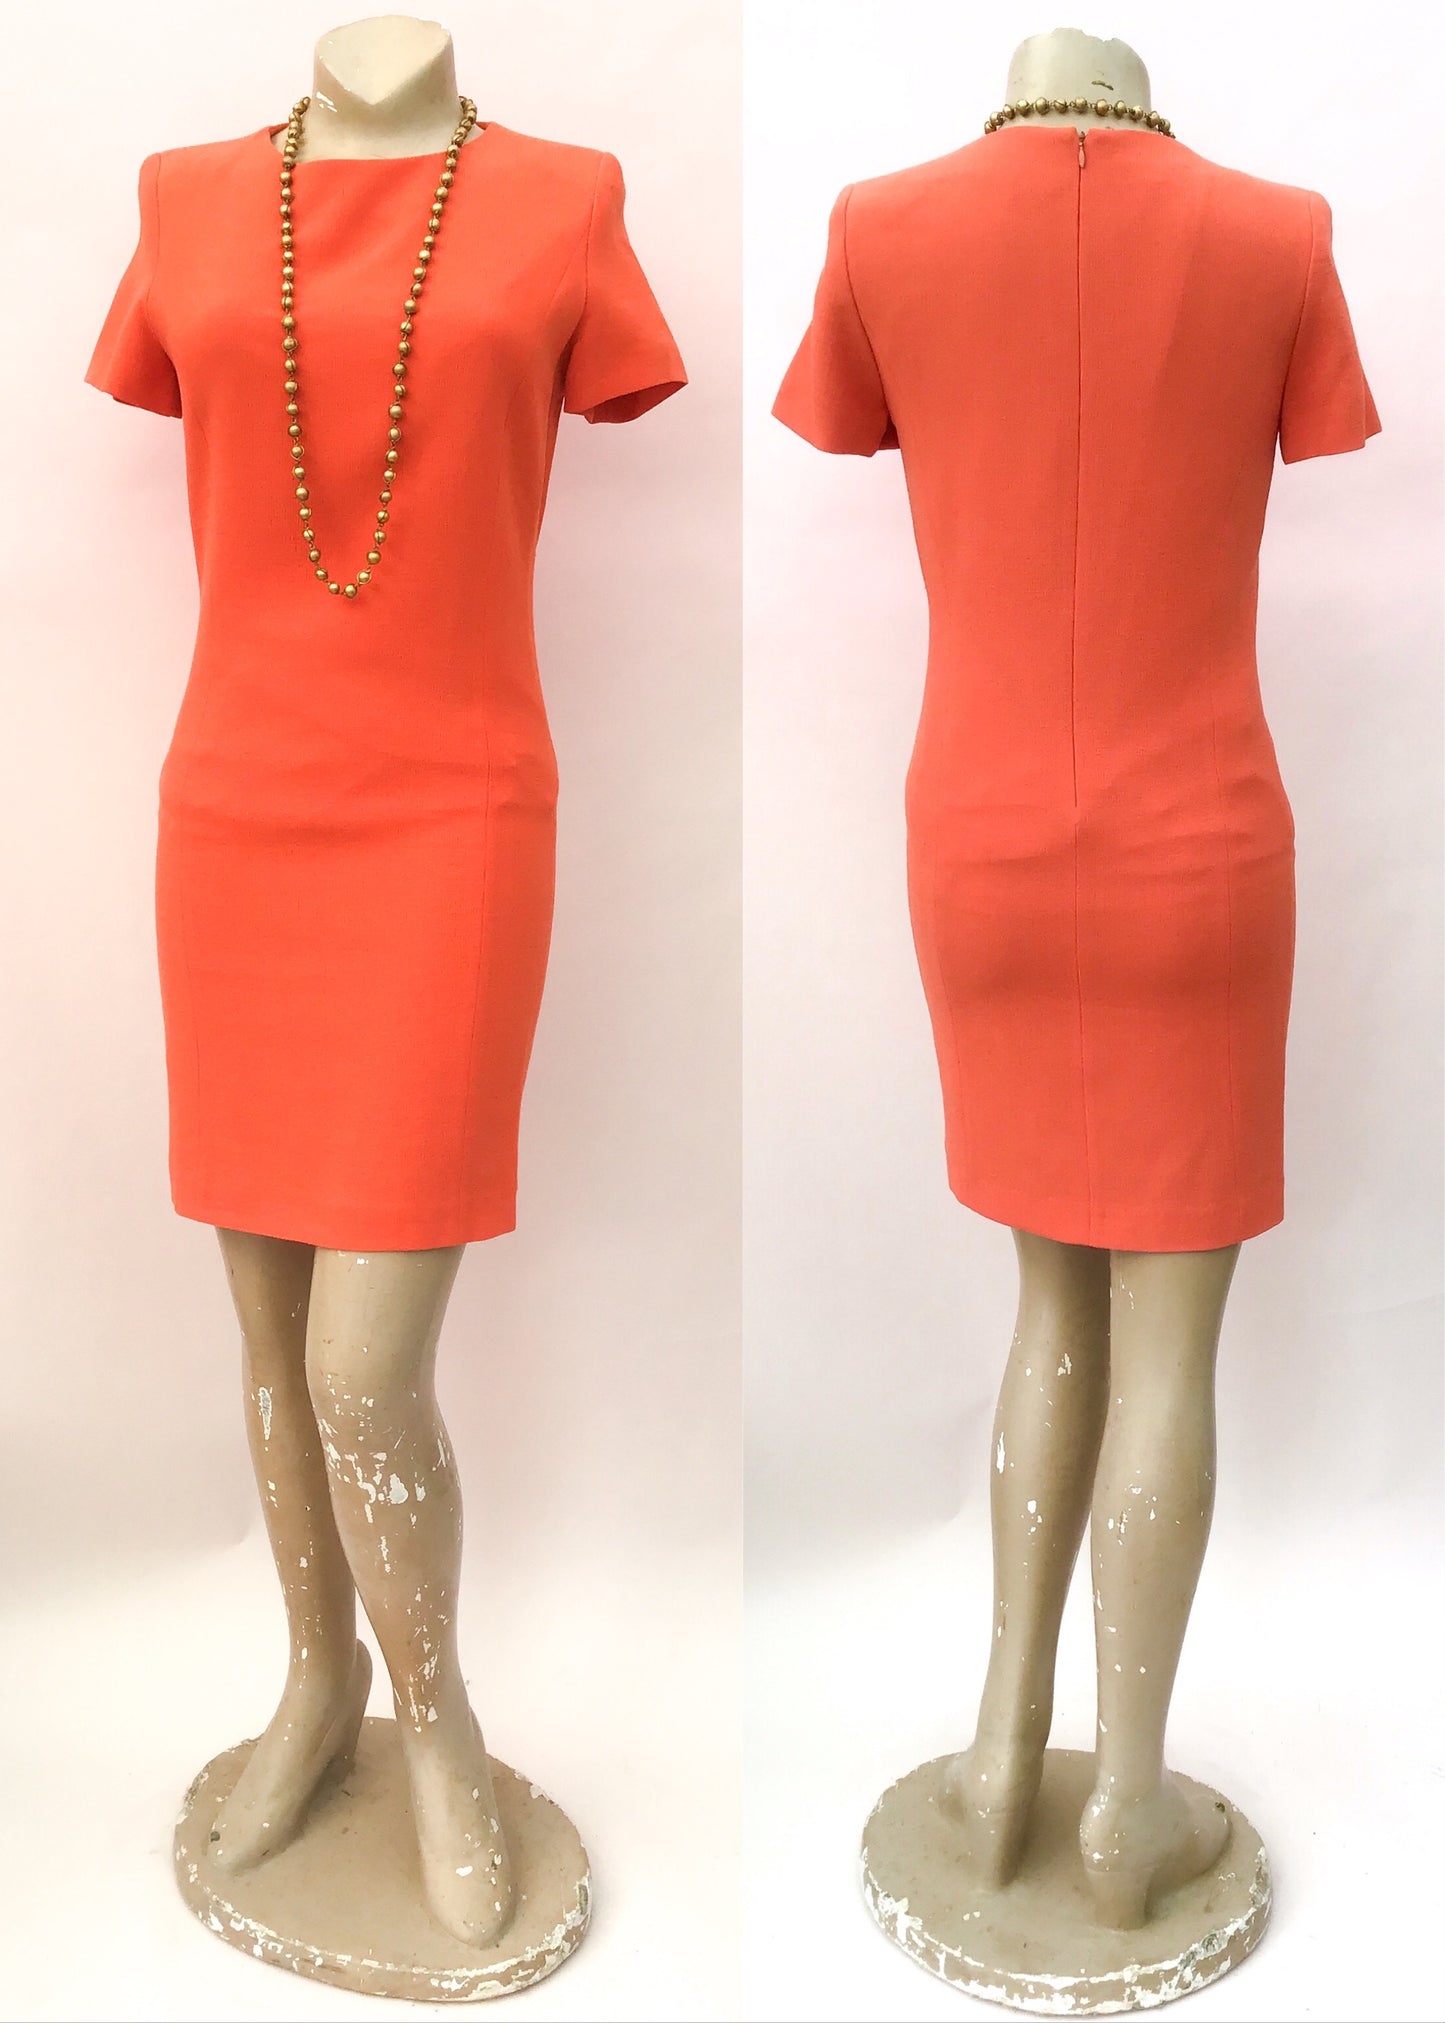 1990s Orange Short Sleeve Wiggle Shift Dress by George Rech for Synonyme